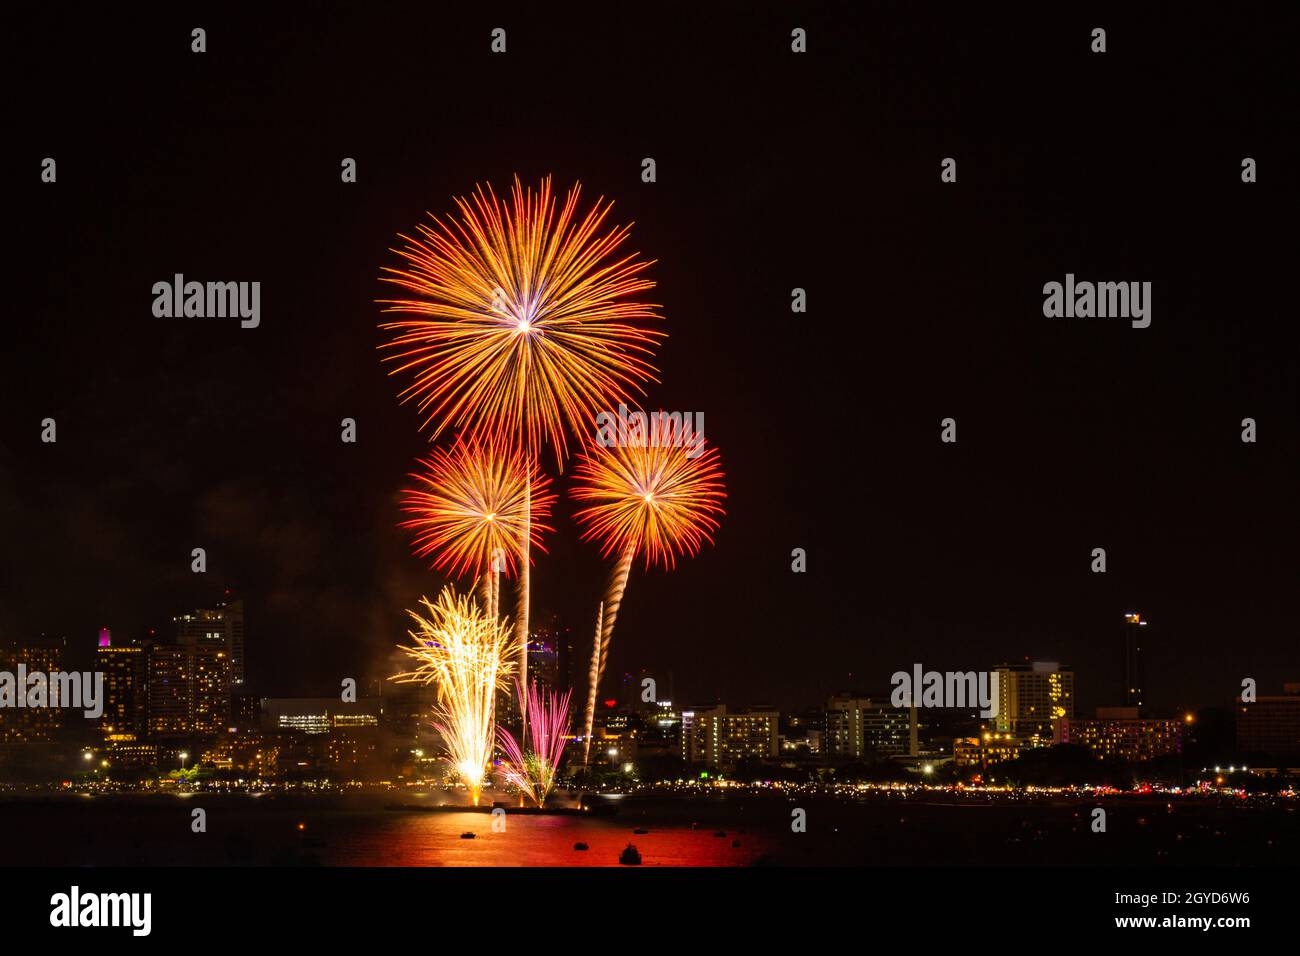 Firework colorful on night city view background for celebration festival. Stock Photo